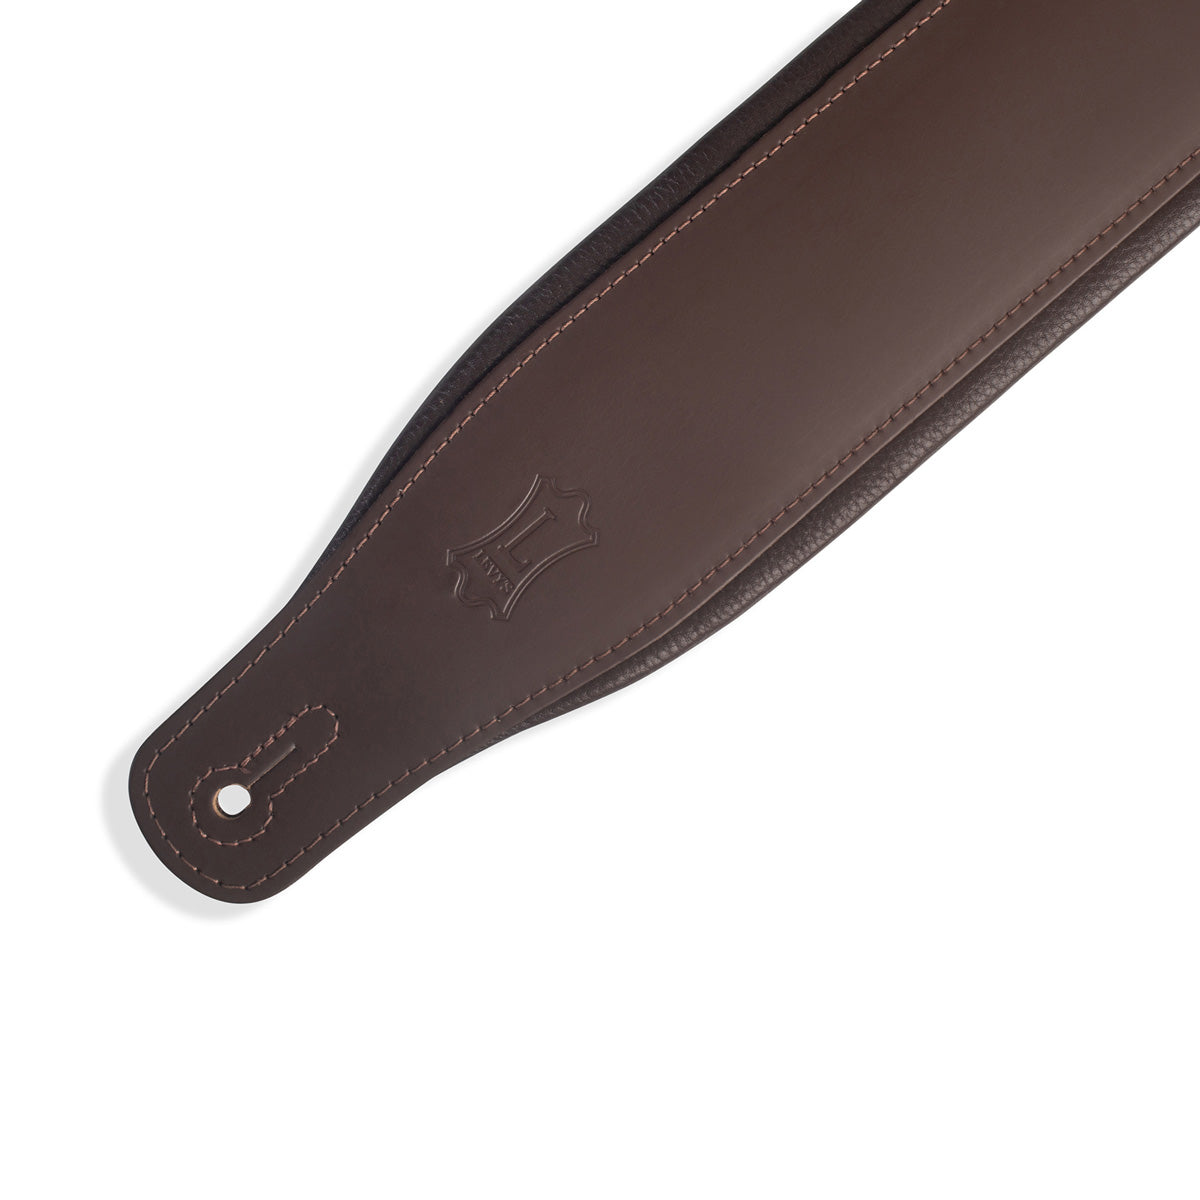 Levy's Classics Series Favorite Padded Leather Guitar Strap - Dark Brown